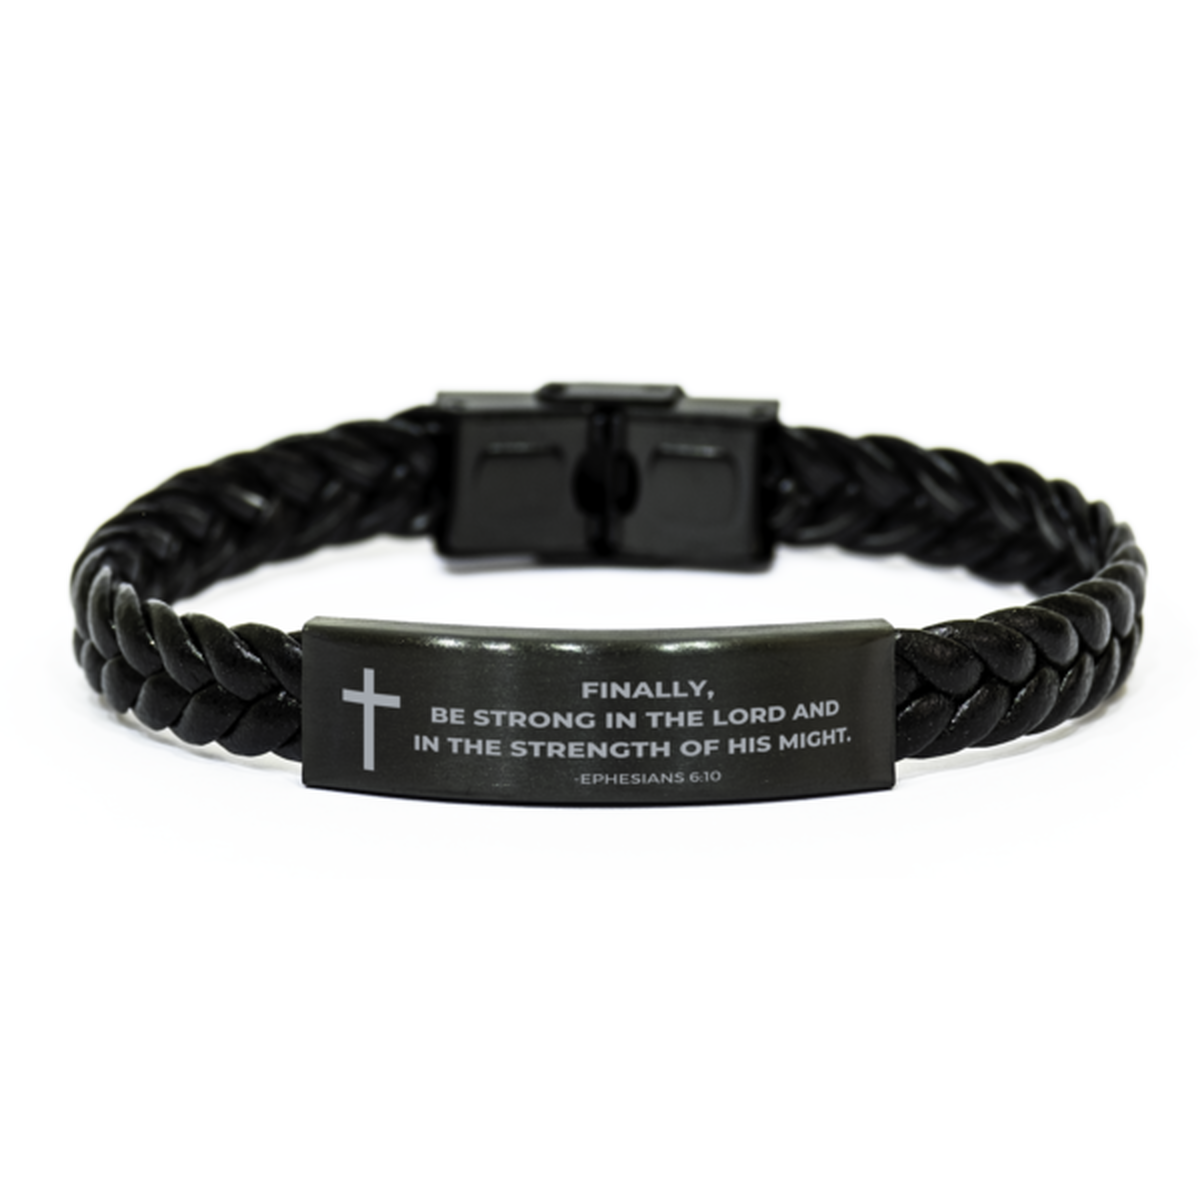 Baptism Gifts For Teenage Boys Girls, Christian Bible Verse Braided Leather Bracelet, Finally, be strong in the Lord Catholic Confirmation Gifts for Son, Godson, Grandson, Nephew